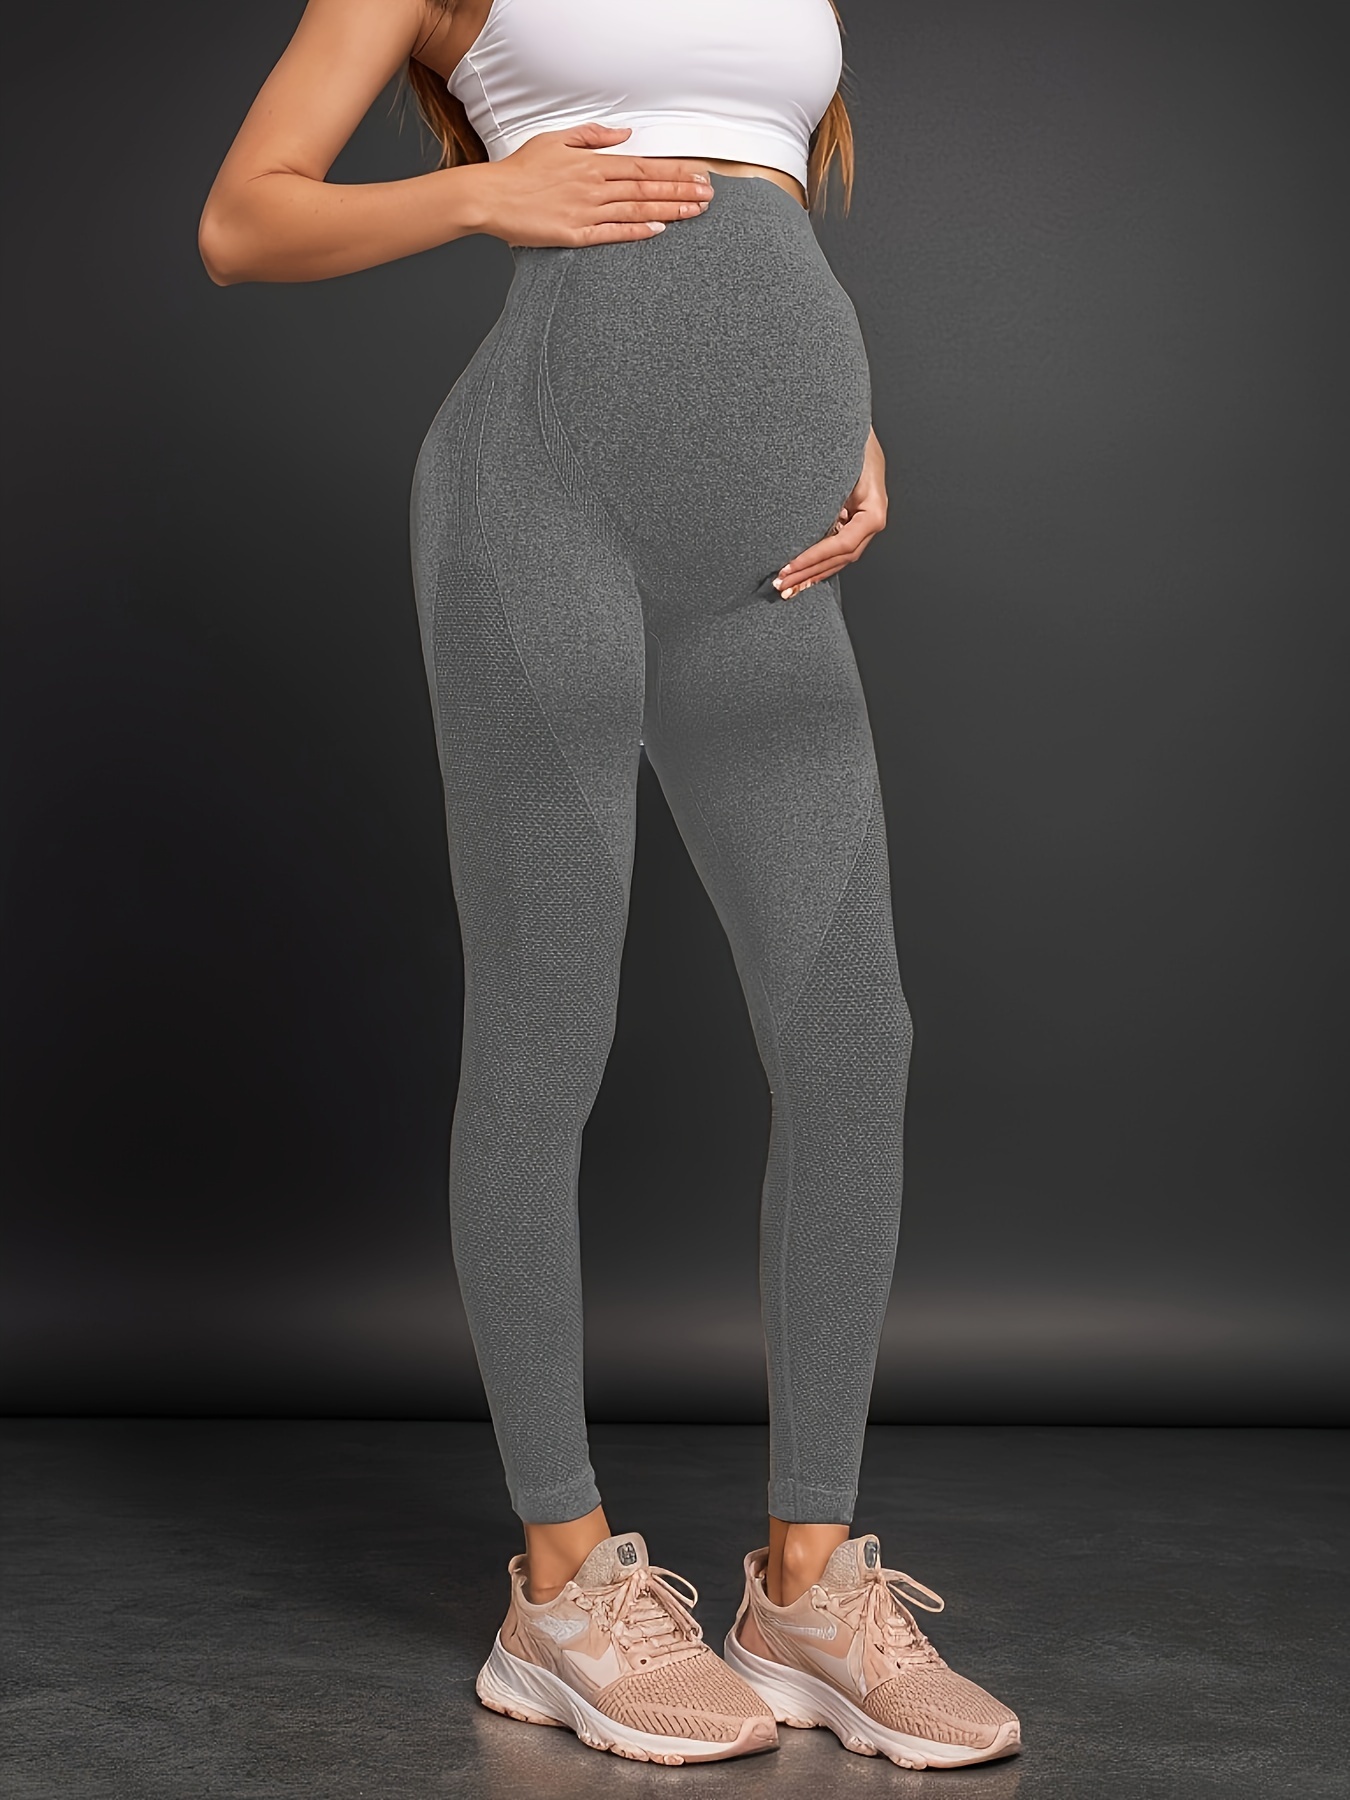 All Day Comfort Breathable Soft High Waist Cotton Spandex Maternity Leggings  Pregnancy Tights With Expandable Belly Panel $4.15 - Wholesale China  Maternity Leggings For Women at factory prices from Yiwu Sanbing Garment